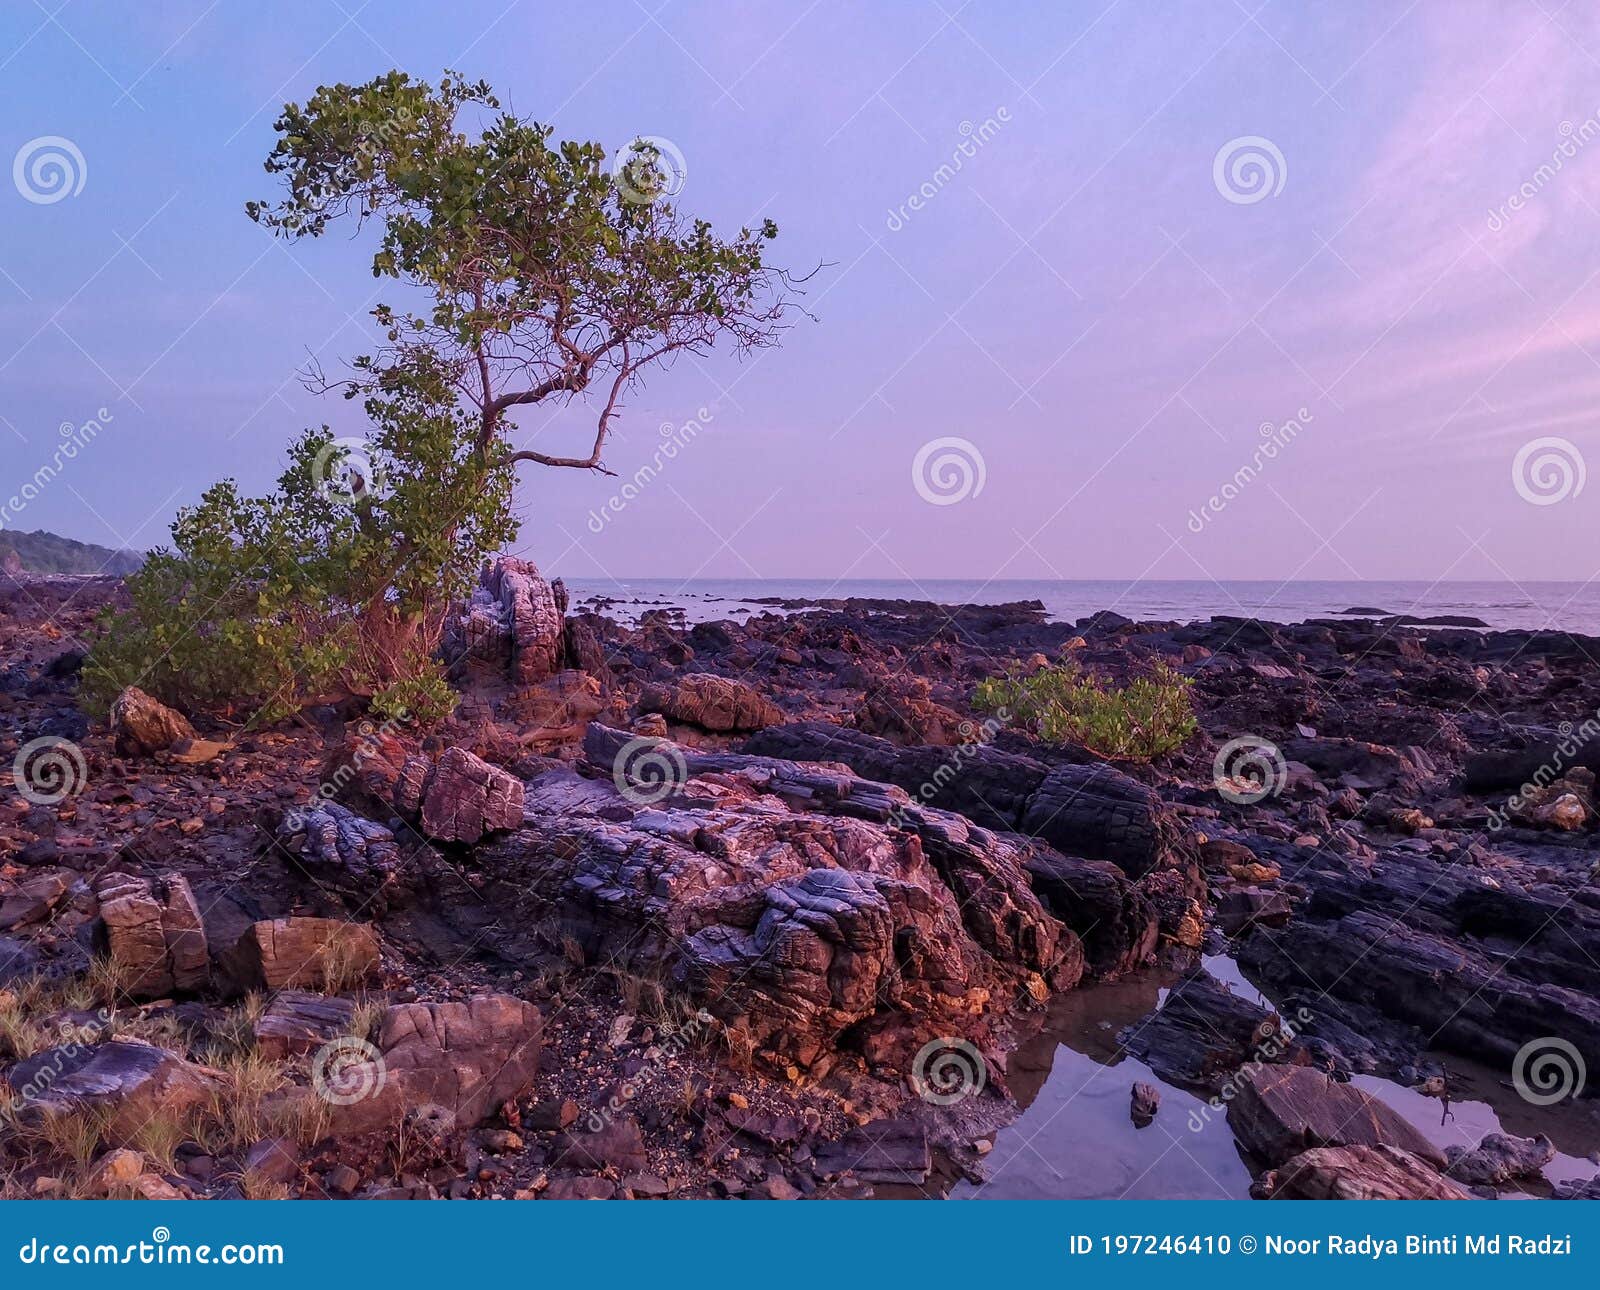 lonely tree on rocky beach view during early morning in kuala sedili besar, johor, malaysia.